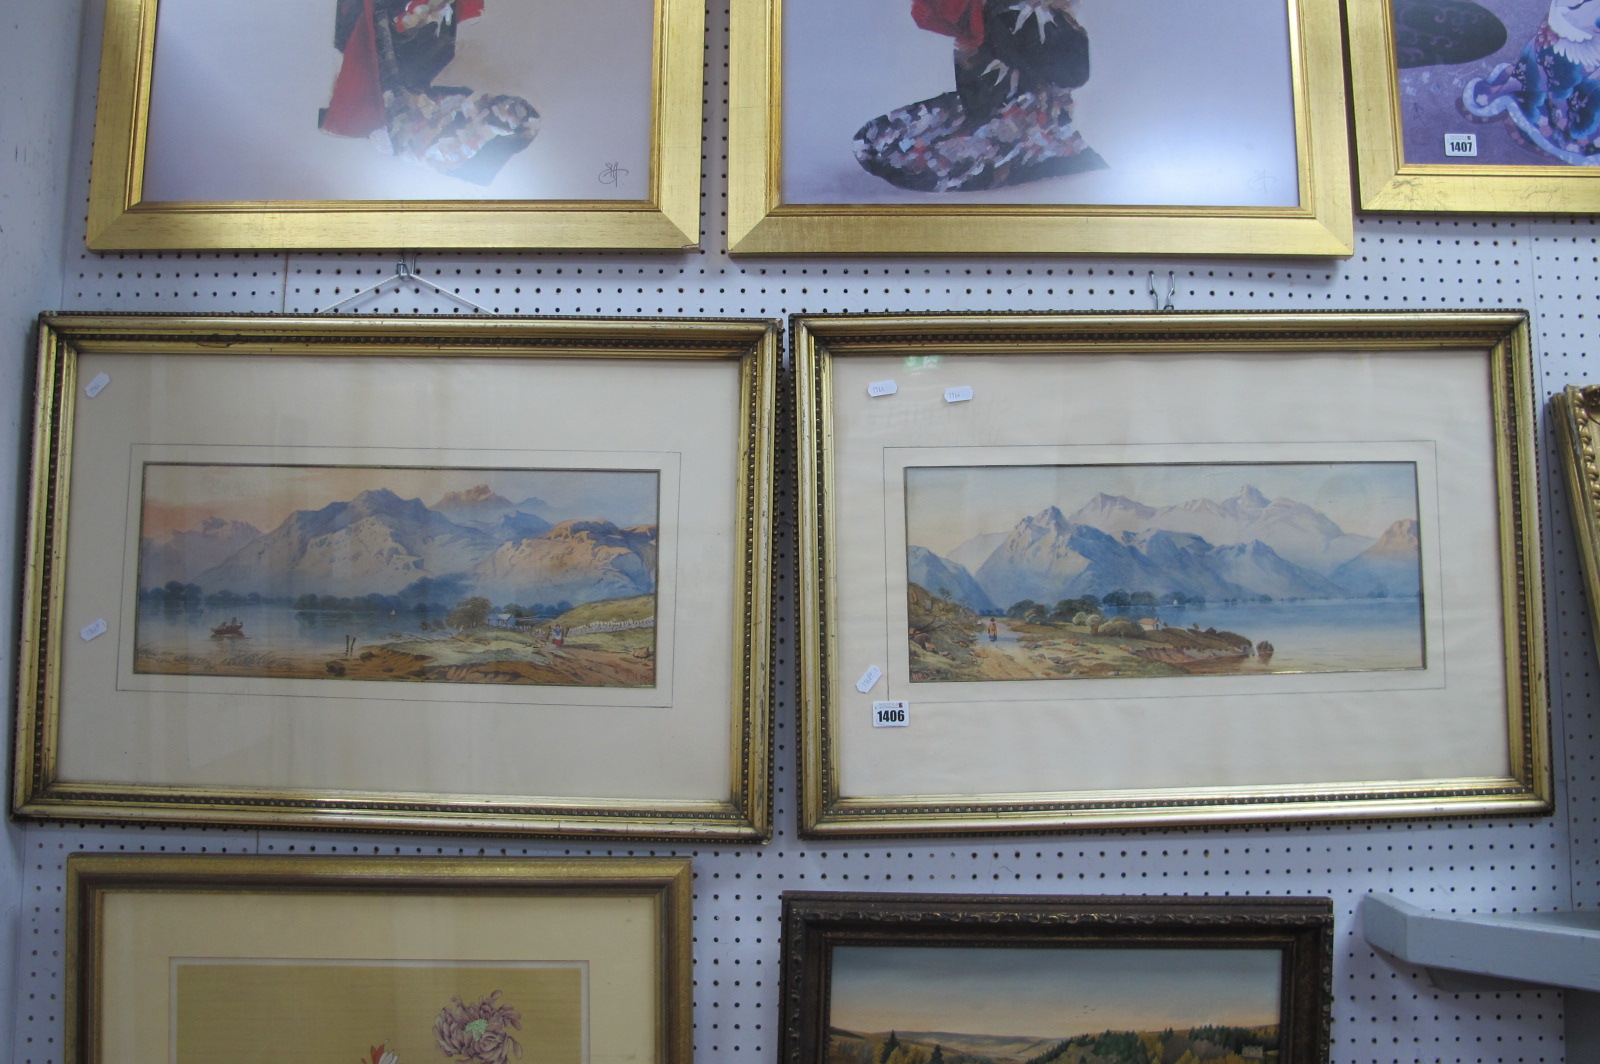 J Nash, Mountain Landscapes, with figures and tranquil lake in foreground, fair watercolours,